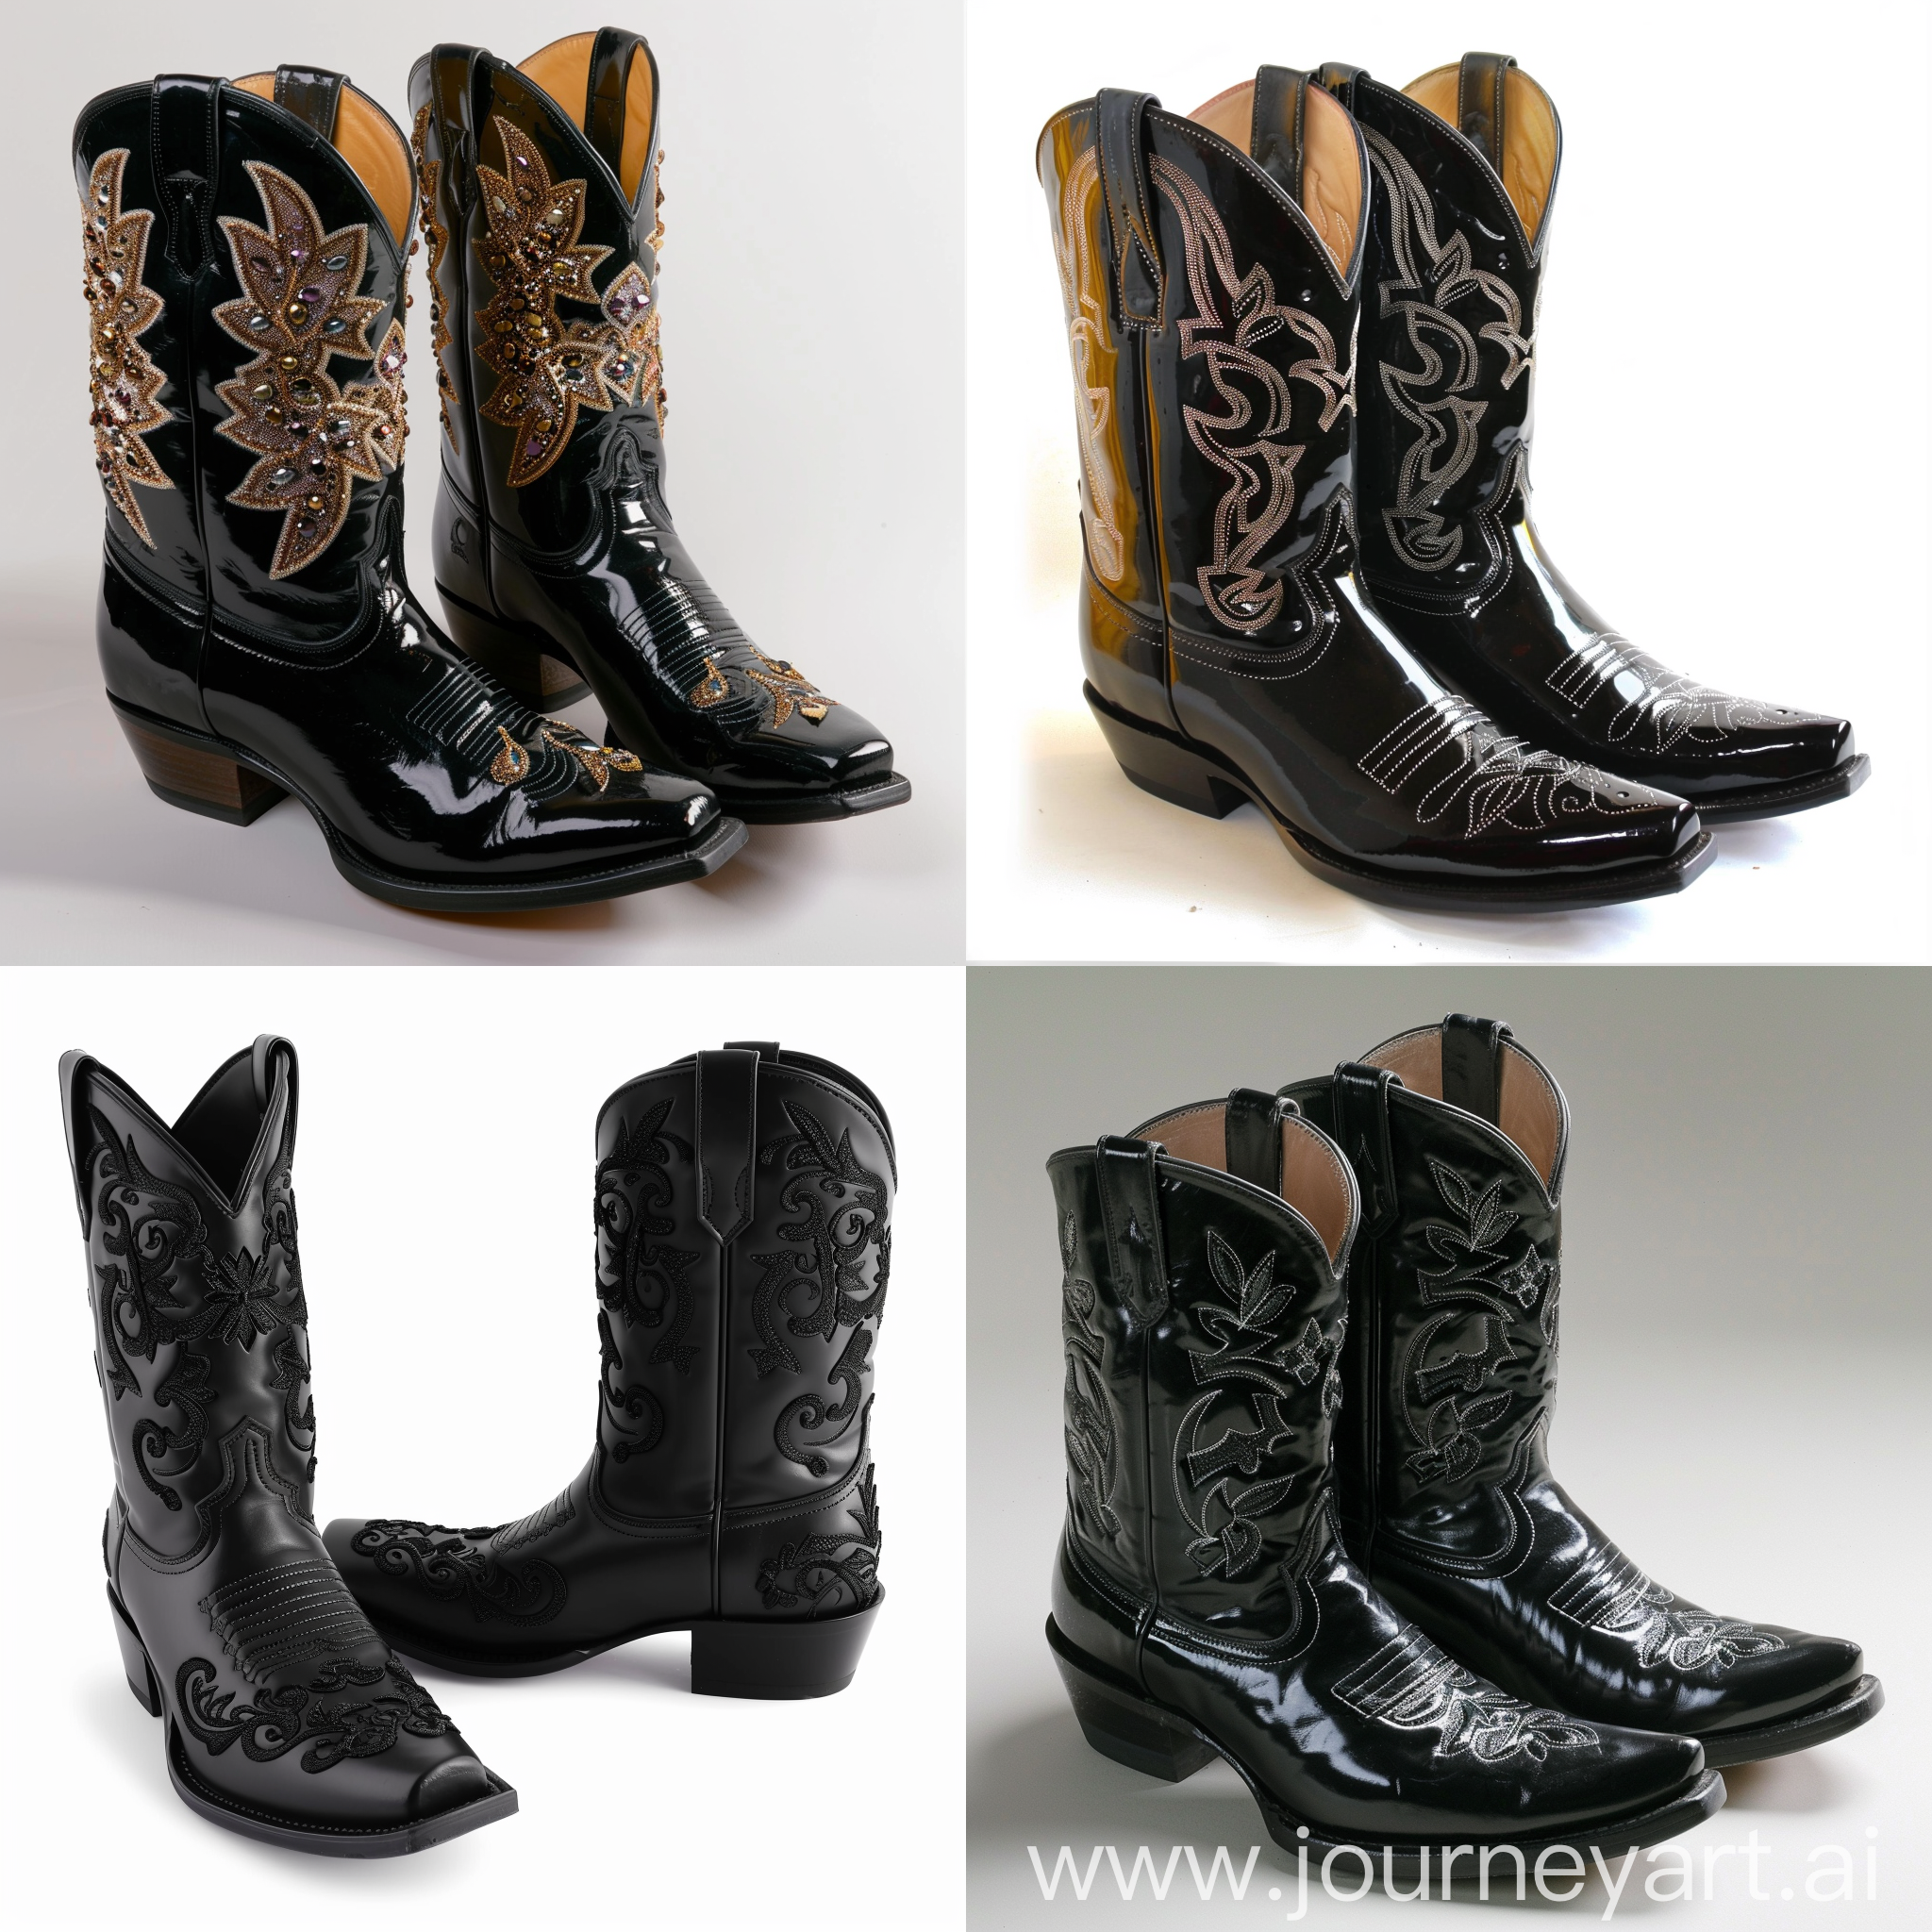 Western theme cowboy boots in black with coquette effects